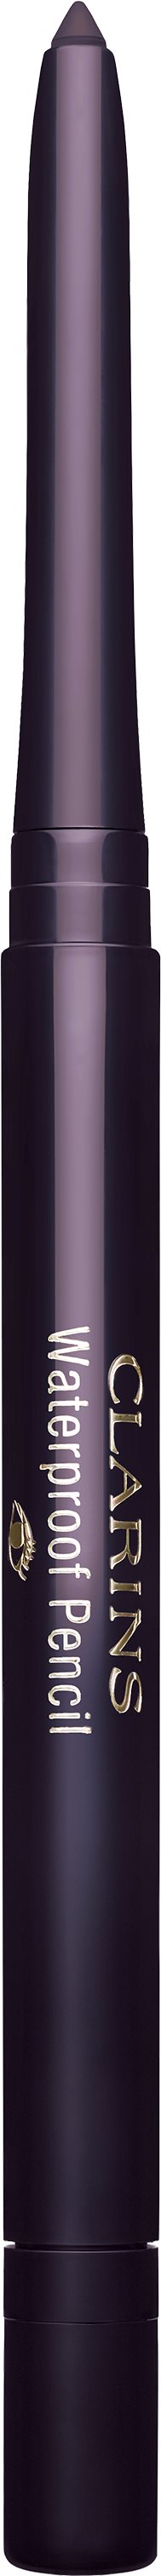 Clarins Water-Proof Pencil Eyelinger 04 (Fig)